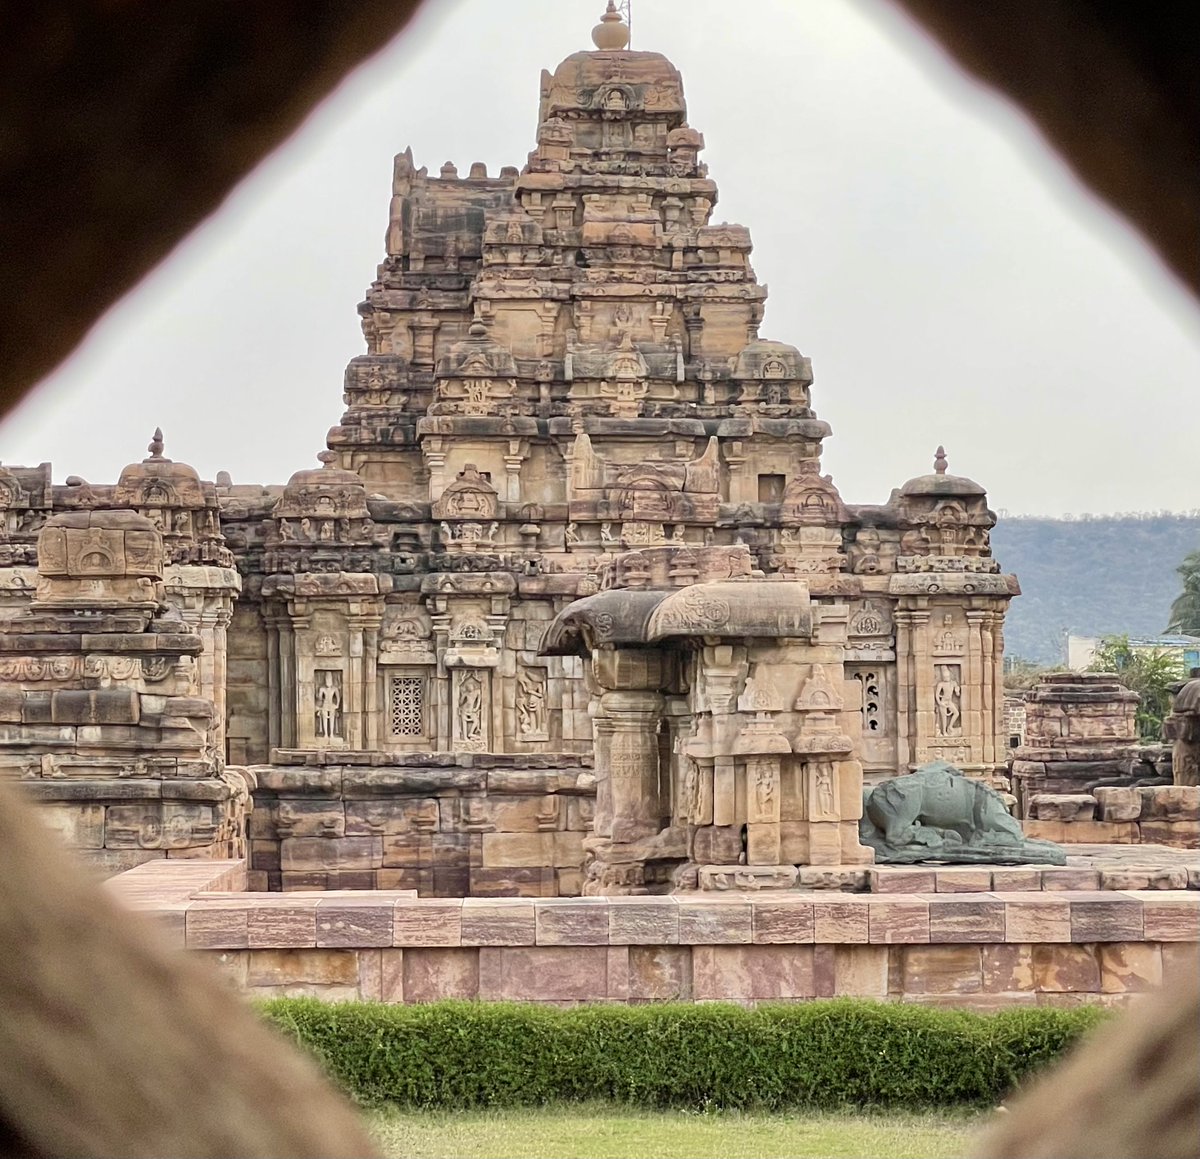 The Virupaksha Temple at Pattadakal, Karnataka, is the largest and most sophisticated structural temple complex of the Early Chalukyas. This Shiva temple was completed in mid-8th century. This temple is the design inspiration for Kailasha Temple at Ellora.
Pic by: Santosh Ojha